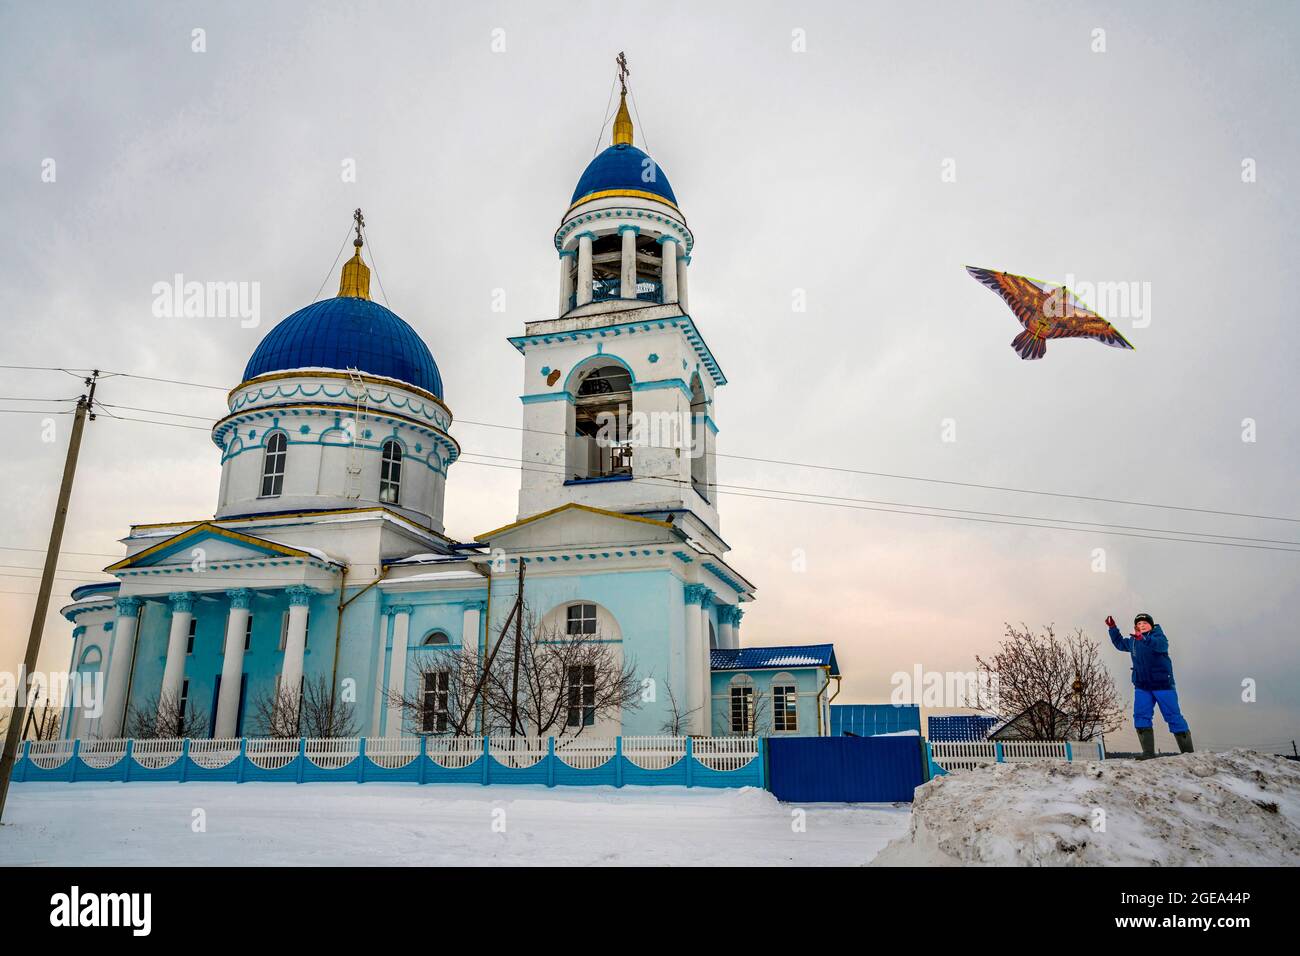 A boy flies a kite next to an Orthodox church in a small village of the Ural Mountains region in Russia. Stock Photo